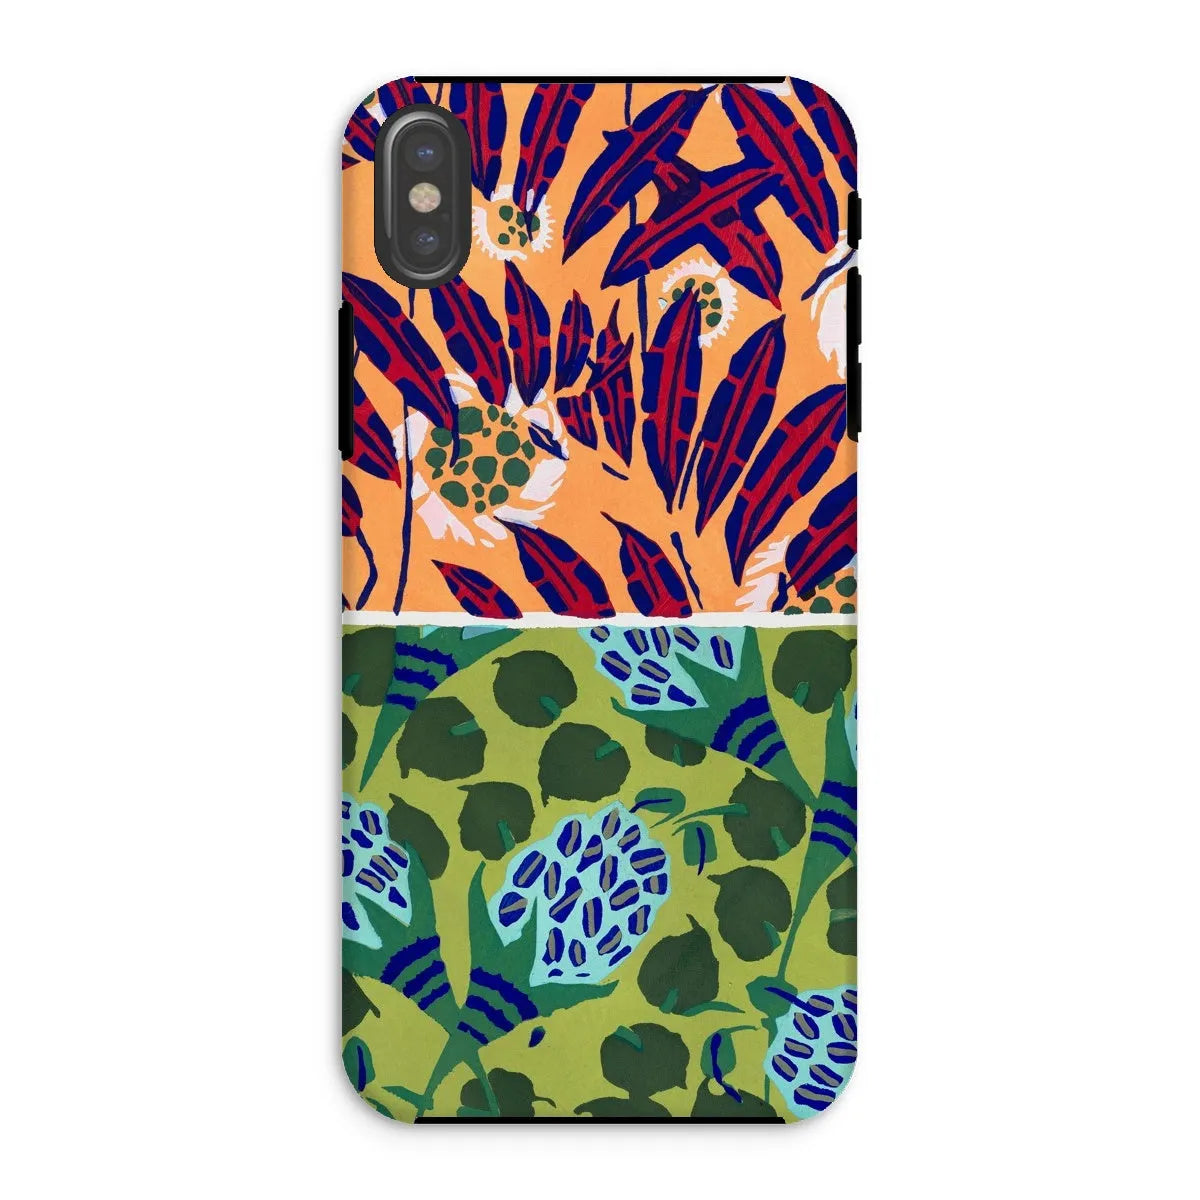 Fabric & Rugs Too - Pochoir Pattern Phone Case - E. A. Séguy - Iphone Xs / Matte - Mobile Phone Cases - Aesthetic Art